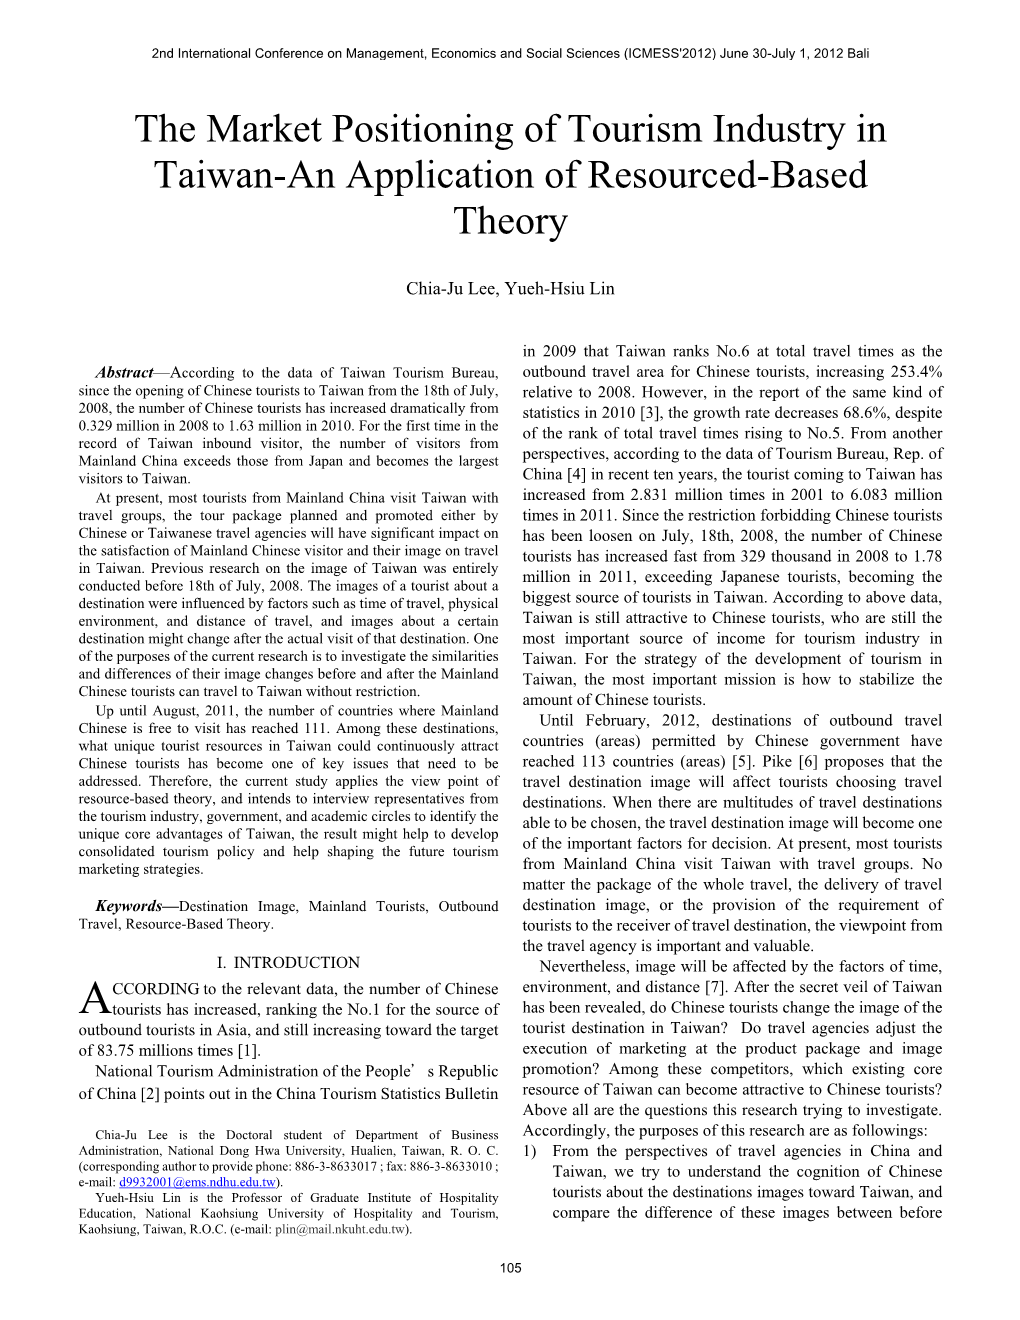 The Market Positioning of Tourism Industry in Taiwan-An Application of Resourced-Based Theory